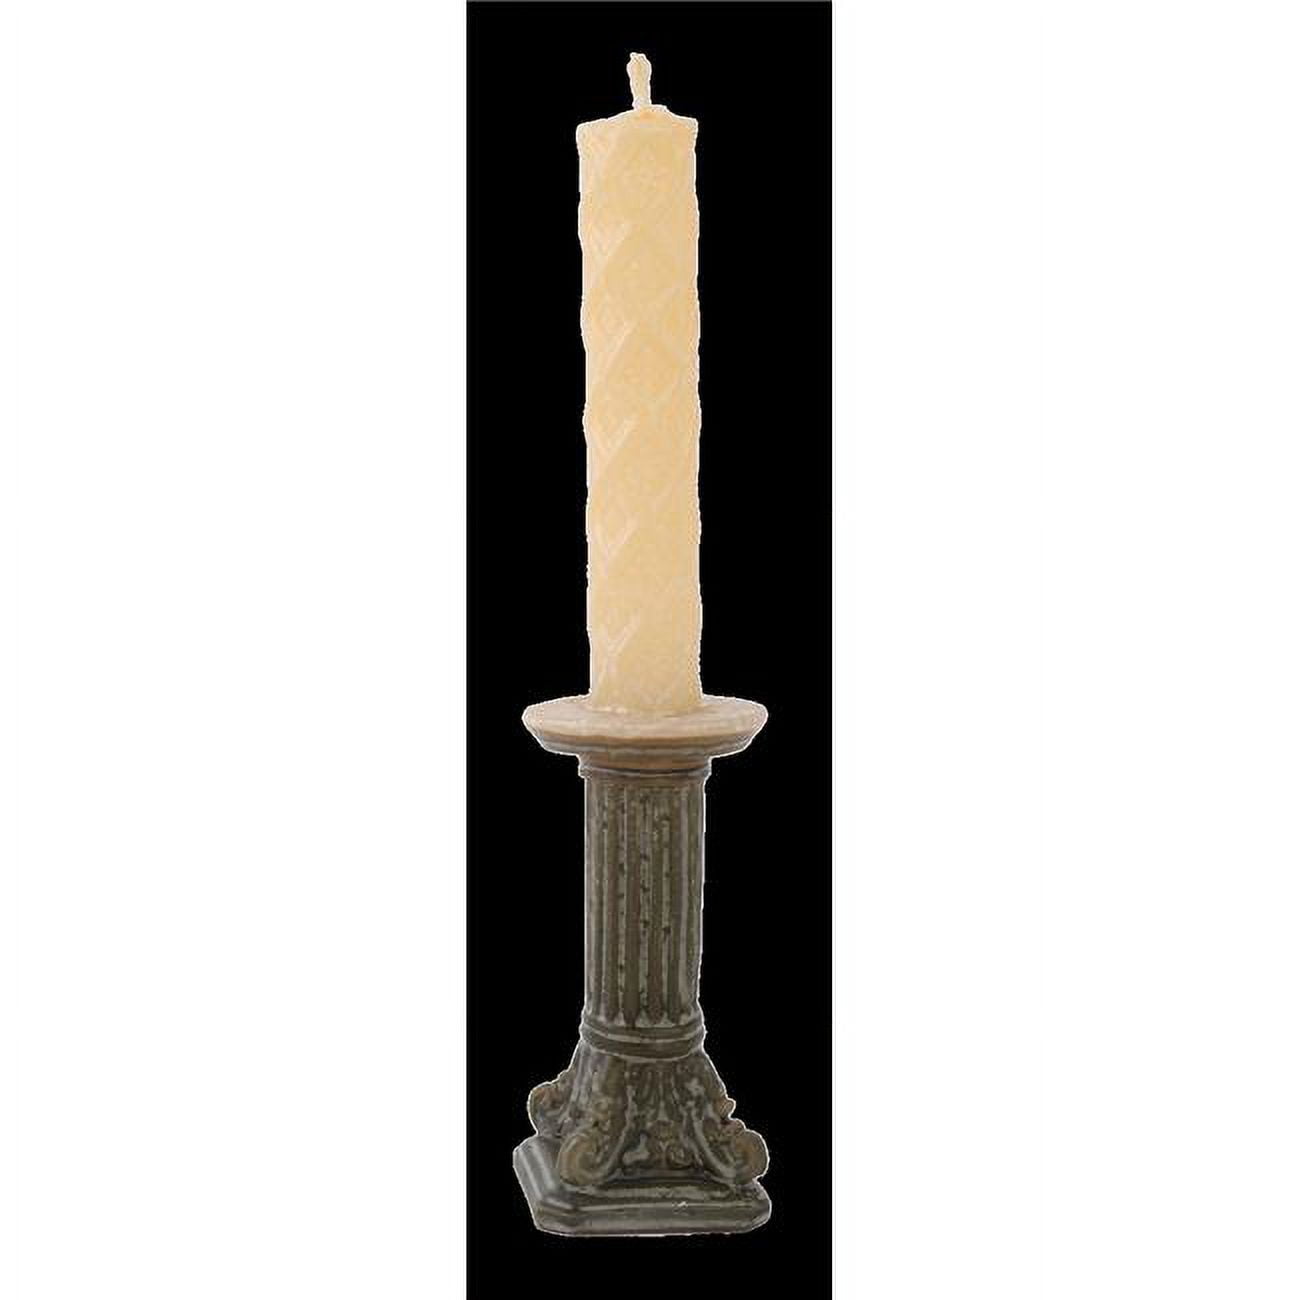 Picture of Bazeh Madlukin 71118D 2.5 x 2.5 x 11 in. Decorative Havdalah Candle Amudei Shlomo